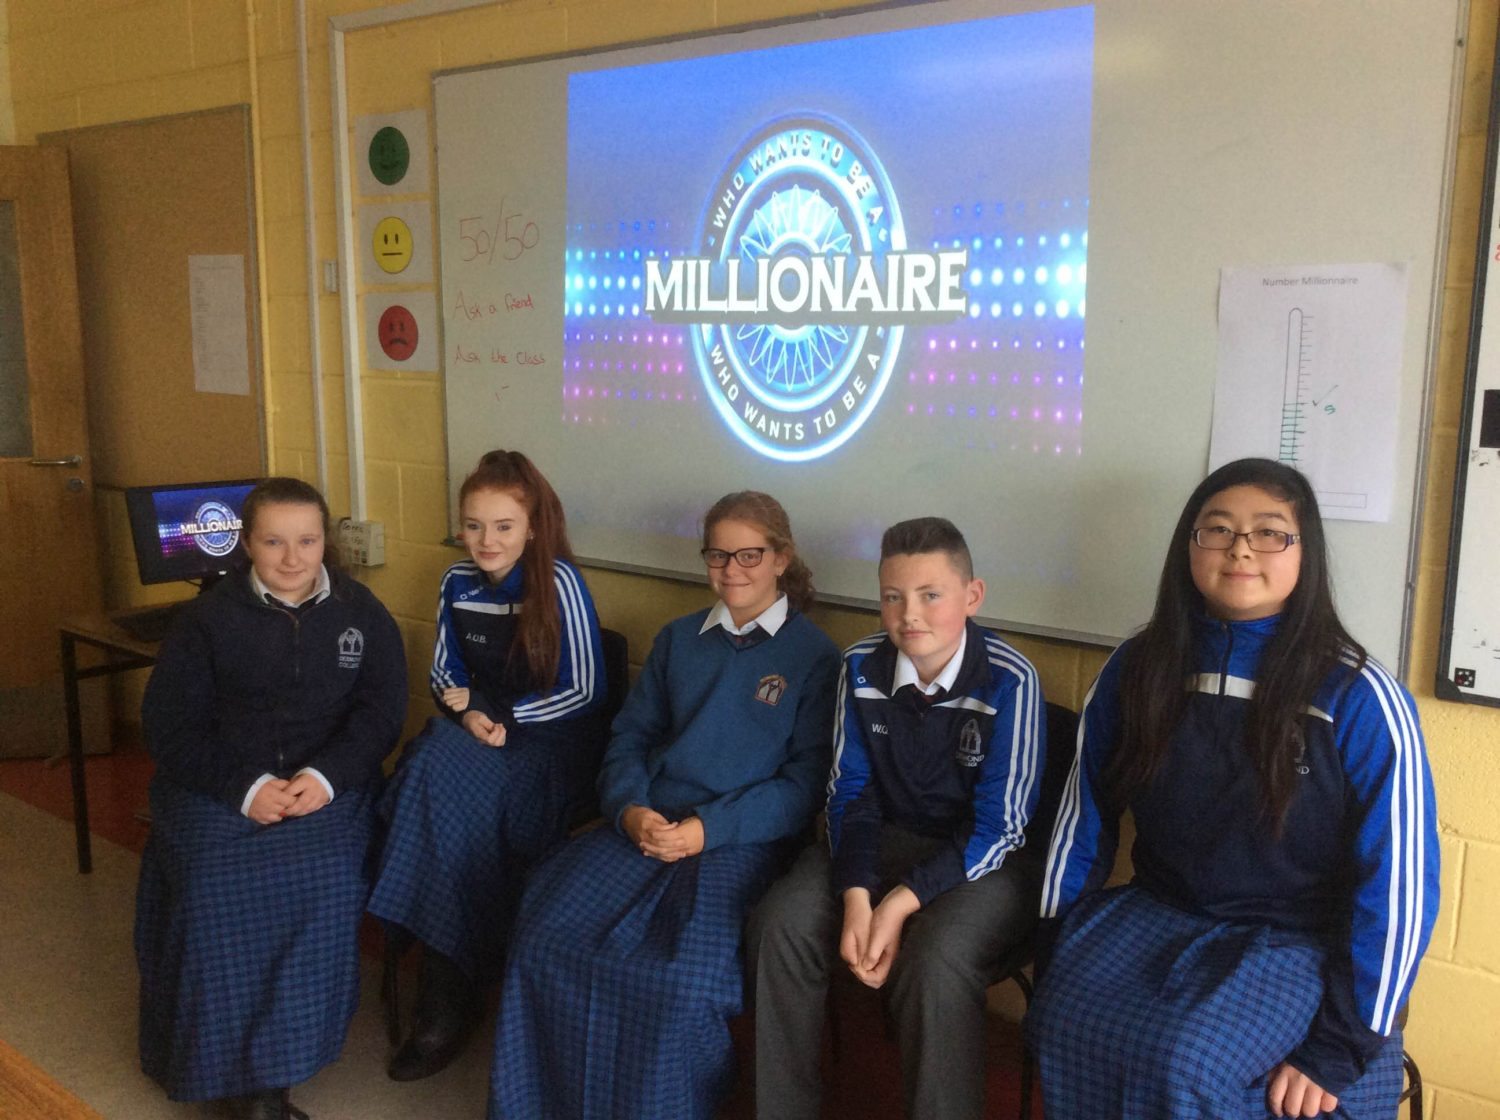 September 2016: Desmond College Second Year Students play Millionaire to help practice their numeracy skills